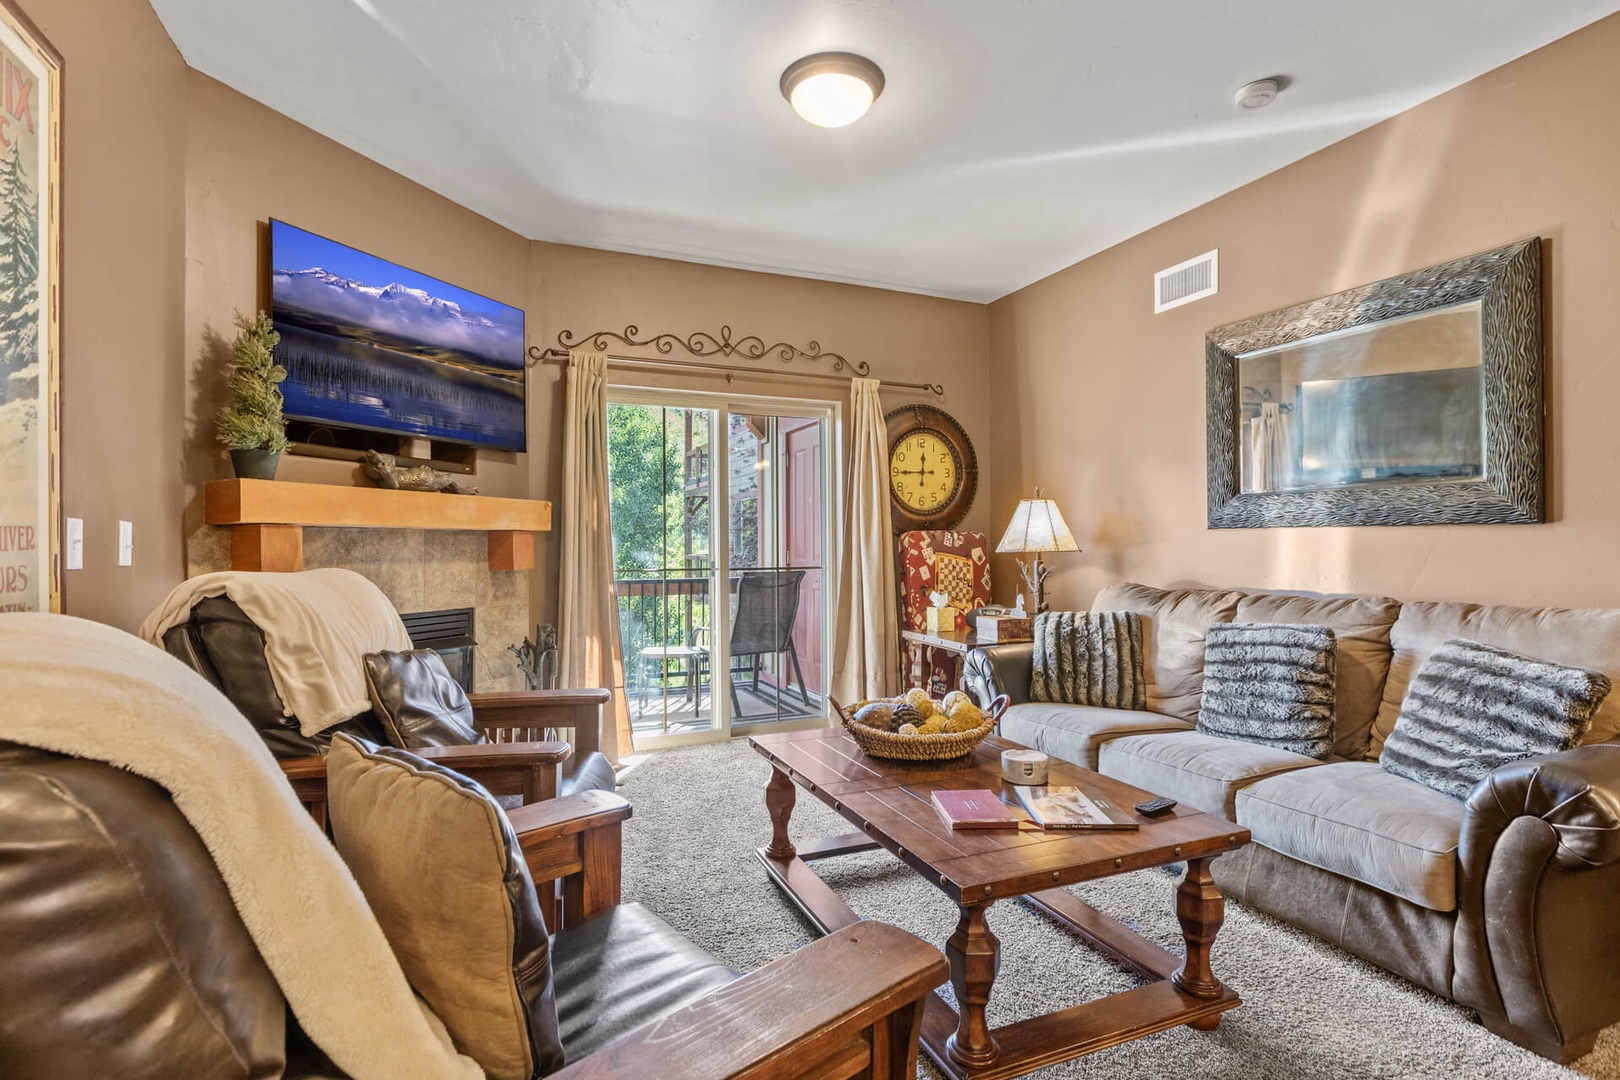 Bear Hollow Lodges 1304: To expand entertainment to the outdoors there is easy access to the large outdoor balcony just adjacent to the living room.